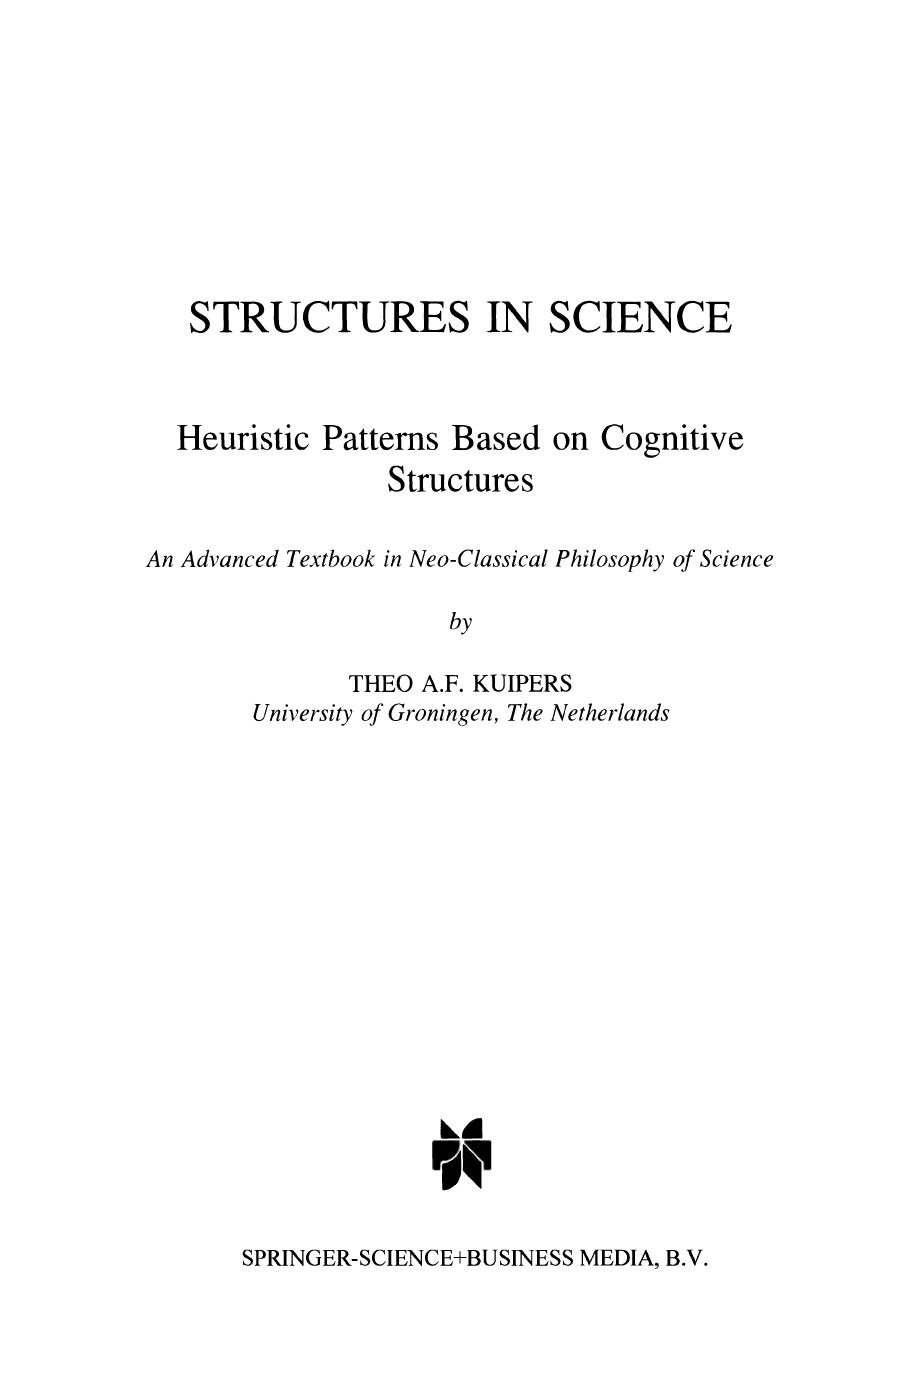 Structures in Science: Heuristic Patterns Based on Cognitive Structures an Advanced Textbook in Neo-Classical Philosophy of Science